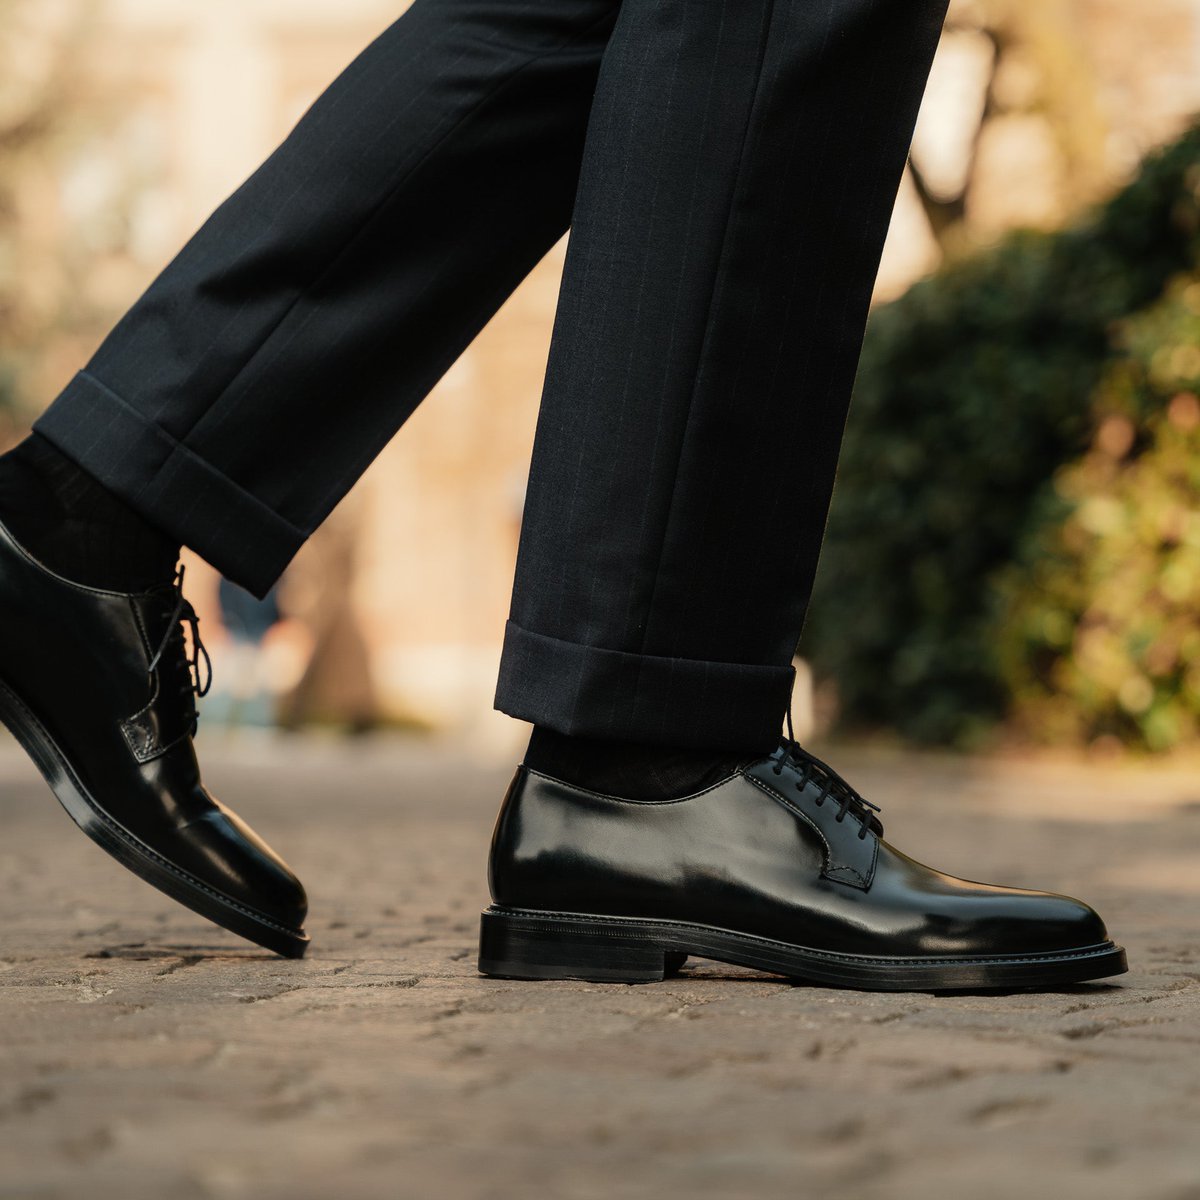 Discover the Perfect Blend of Style and Comfort with our Black Brogue Derby. Elevate your formal attire effortlessly with superior craftsmanship👞✨
#Drexidon #MensFashion #BrogueShoes #DerbyShoes #ElegantFootwear #MensFootwear #ClassicStyle #FormalWear #DressToImpress #MensShoes